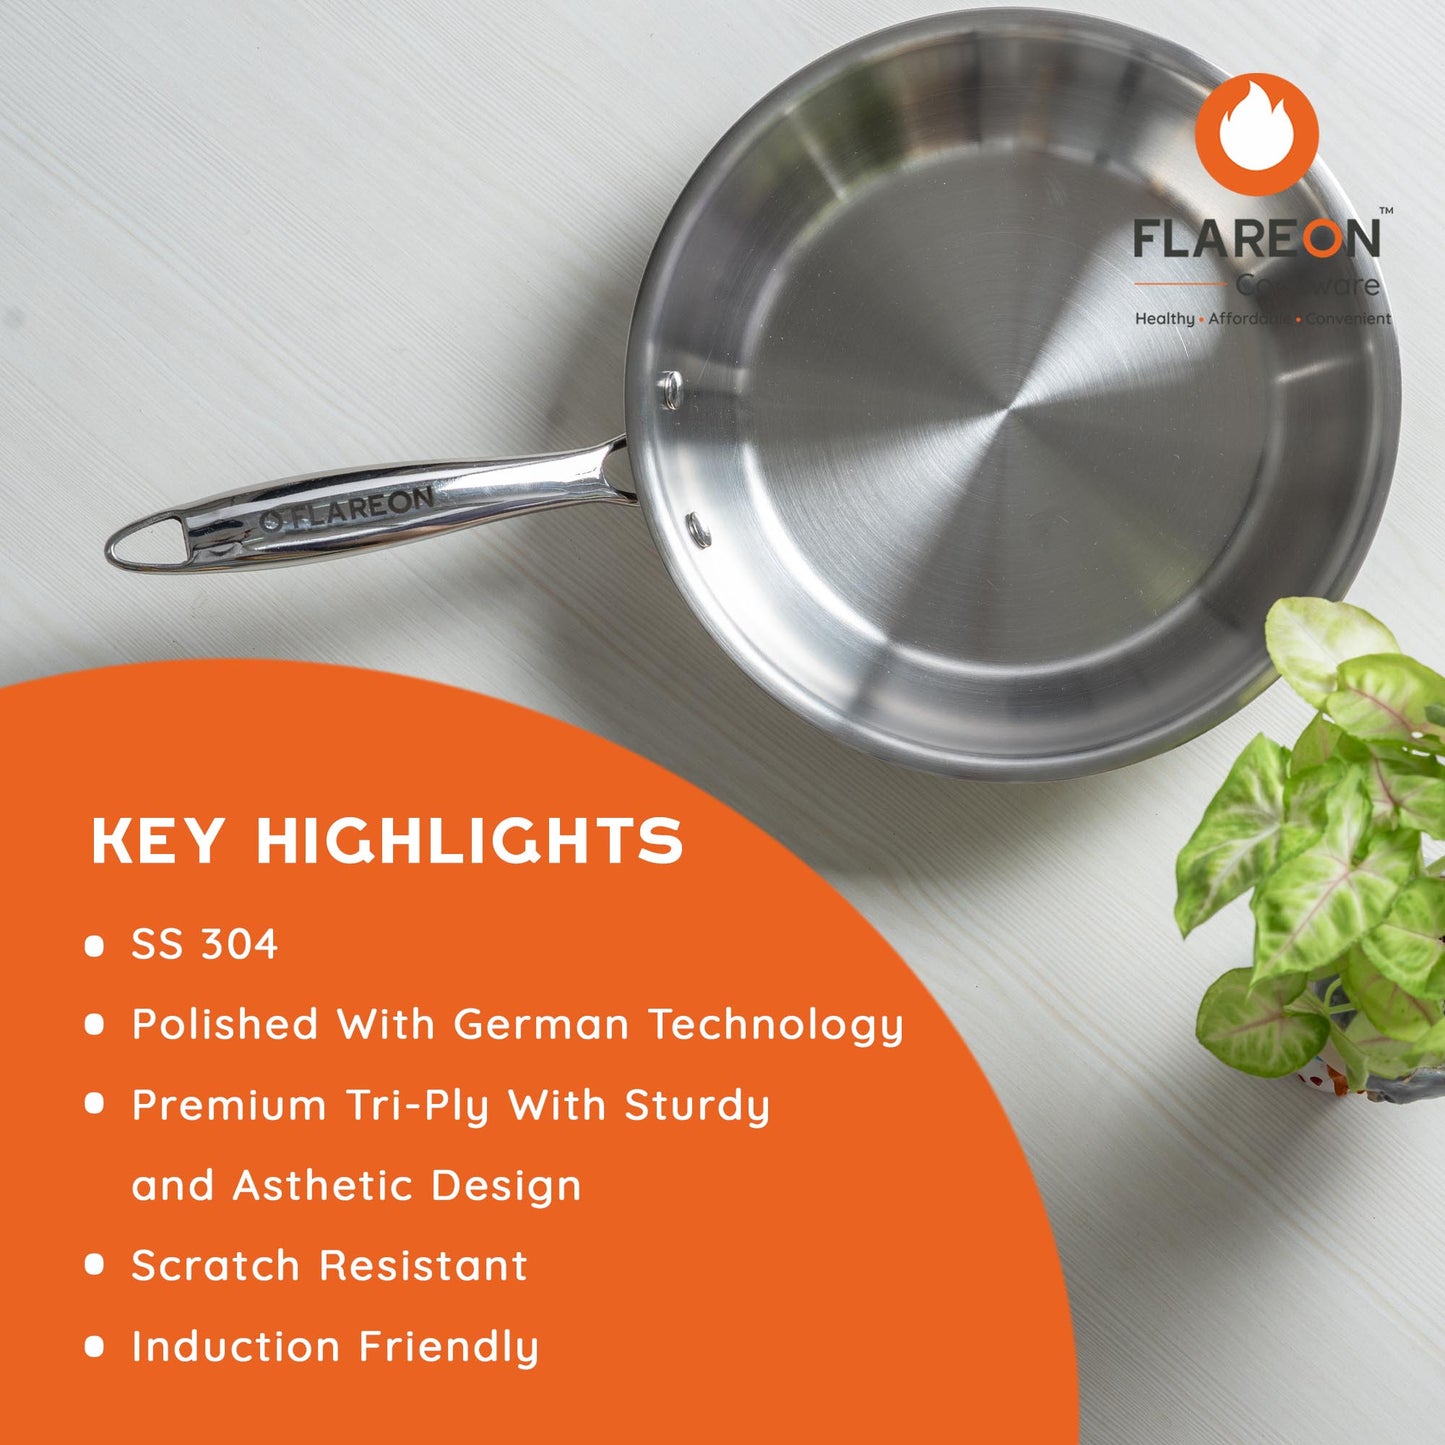 FlareOn's  TriPly Stainless Steel Fry Pan 22 Cm- Key Highlights